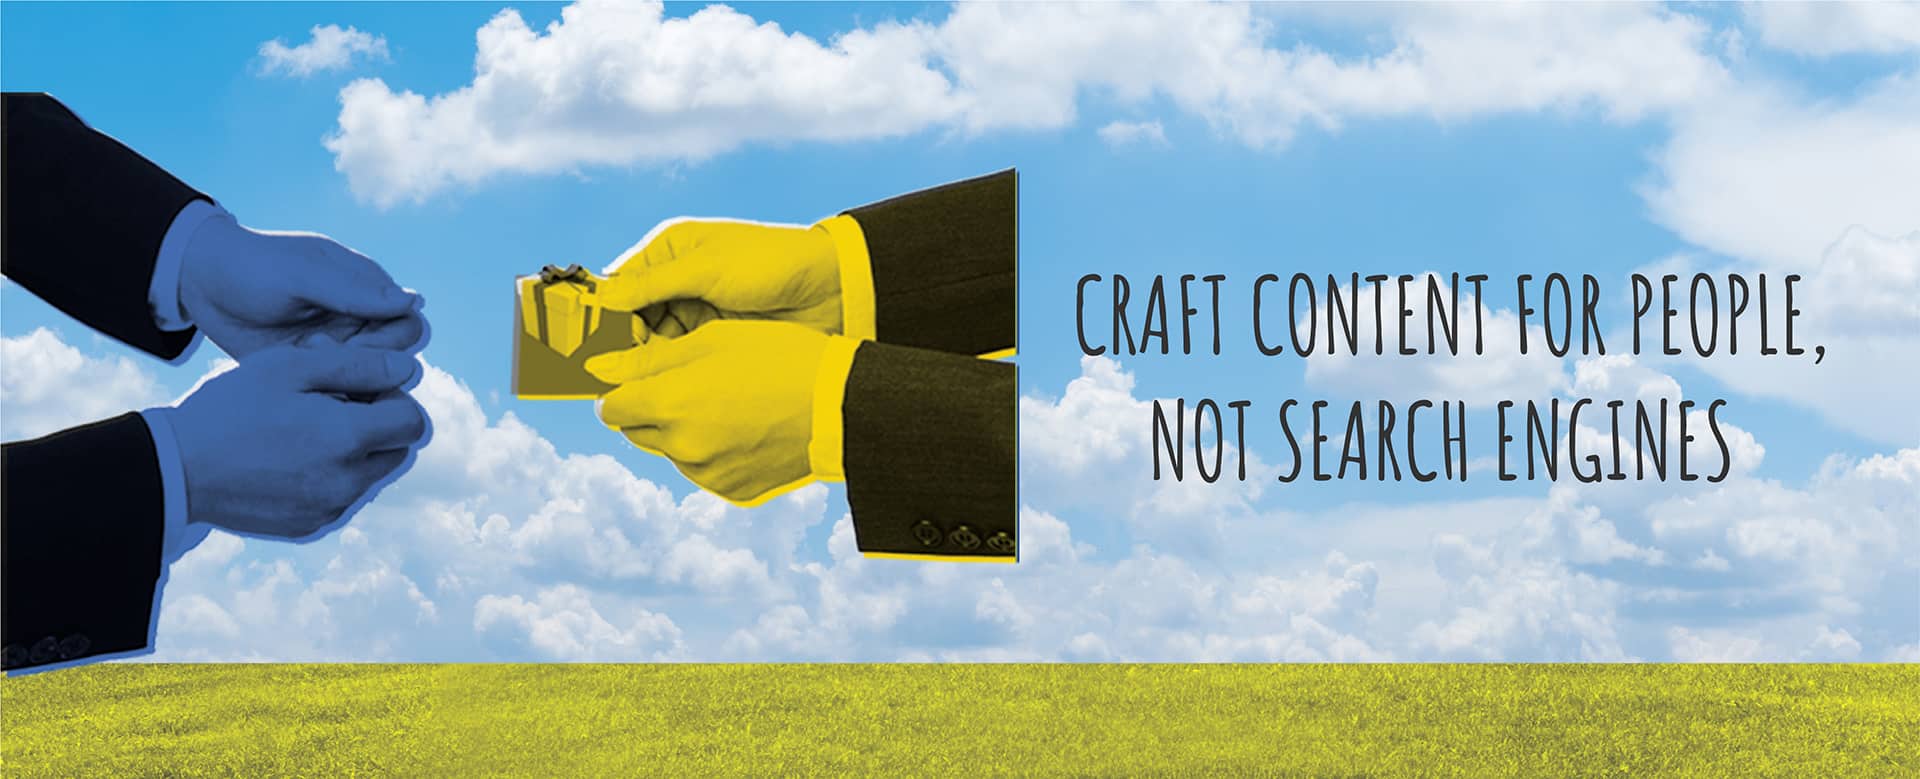 Craft Content for People, Not Search Engines